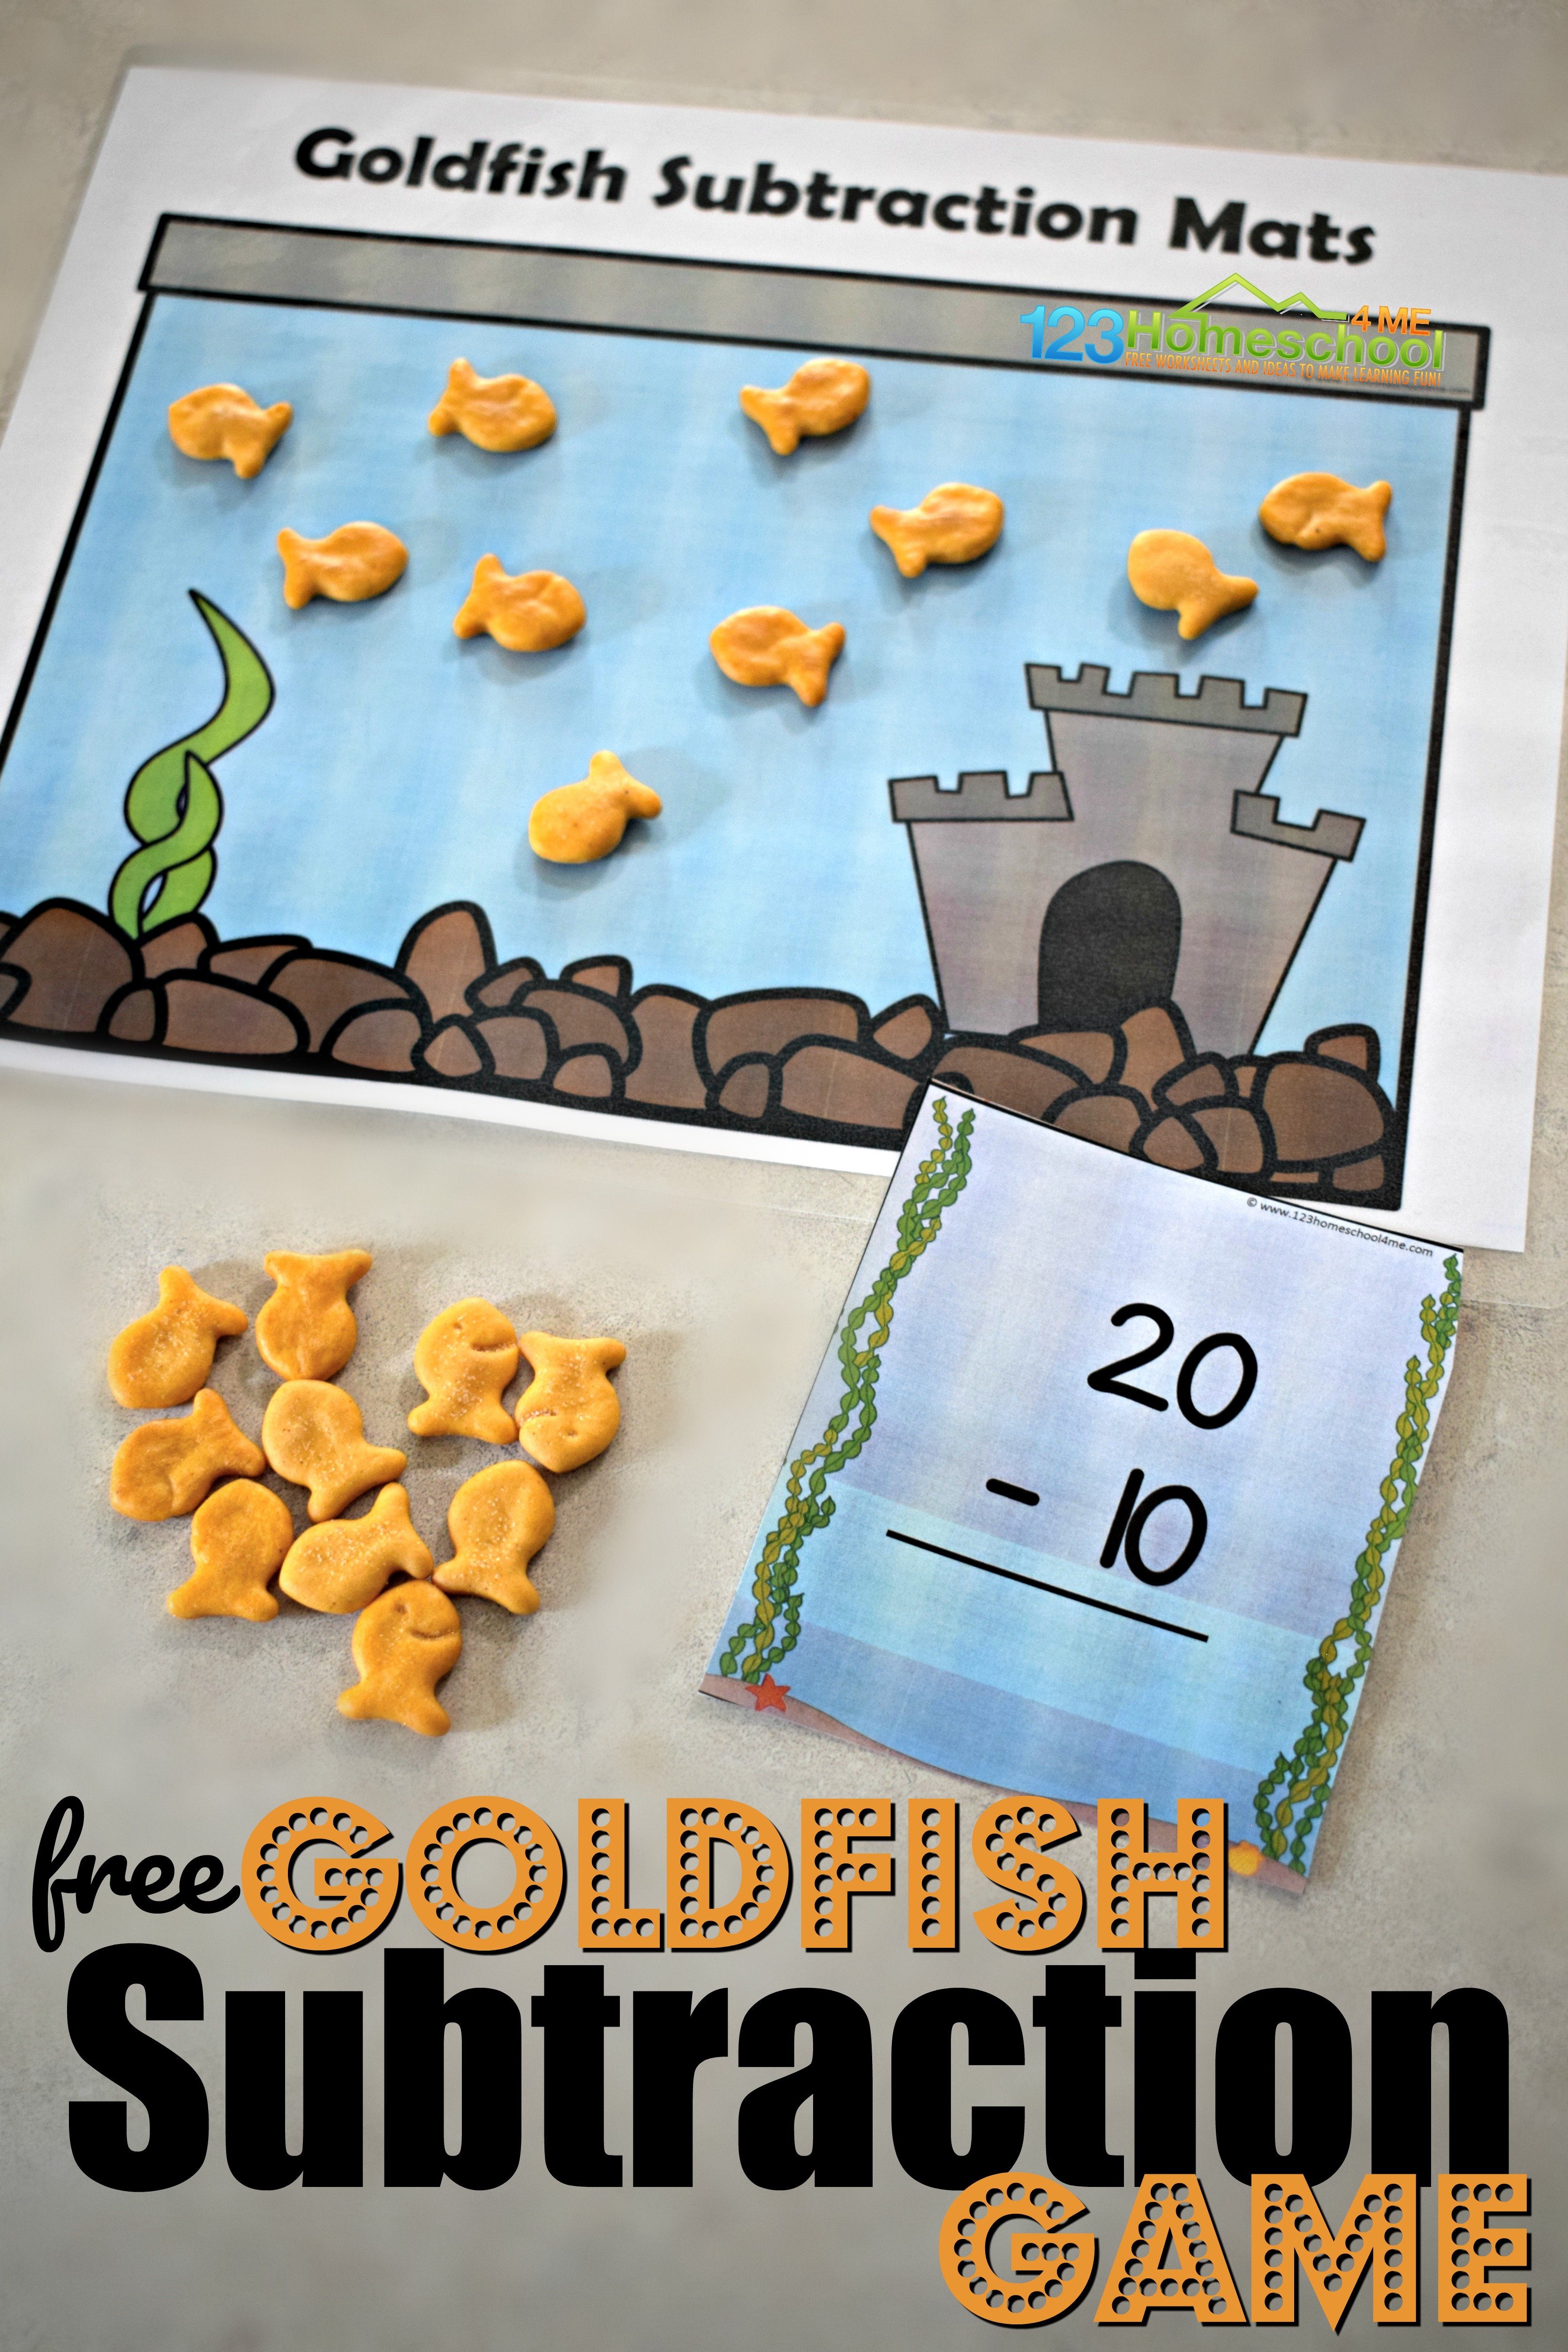 Fun, hands on subtraction game using our free subtraction printable and goldfish